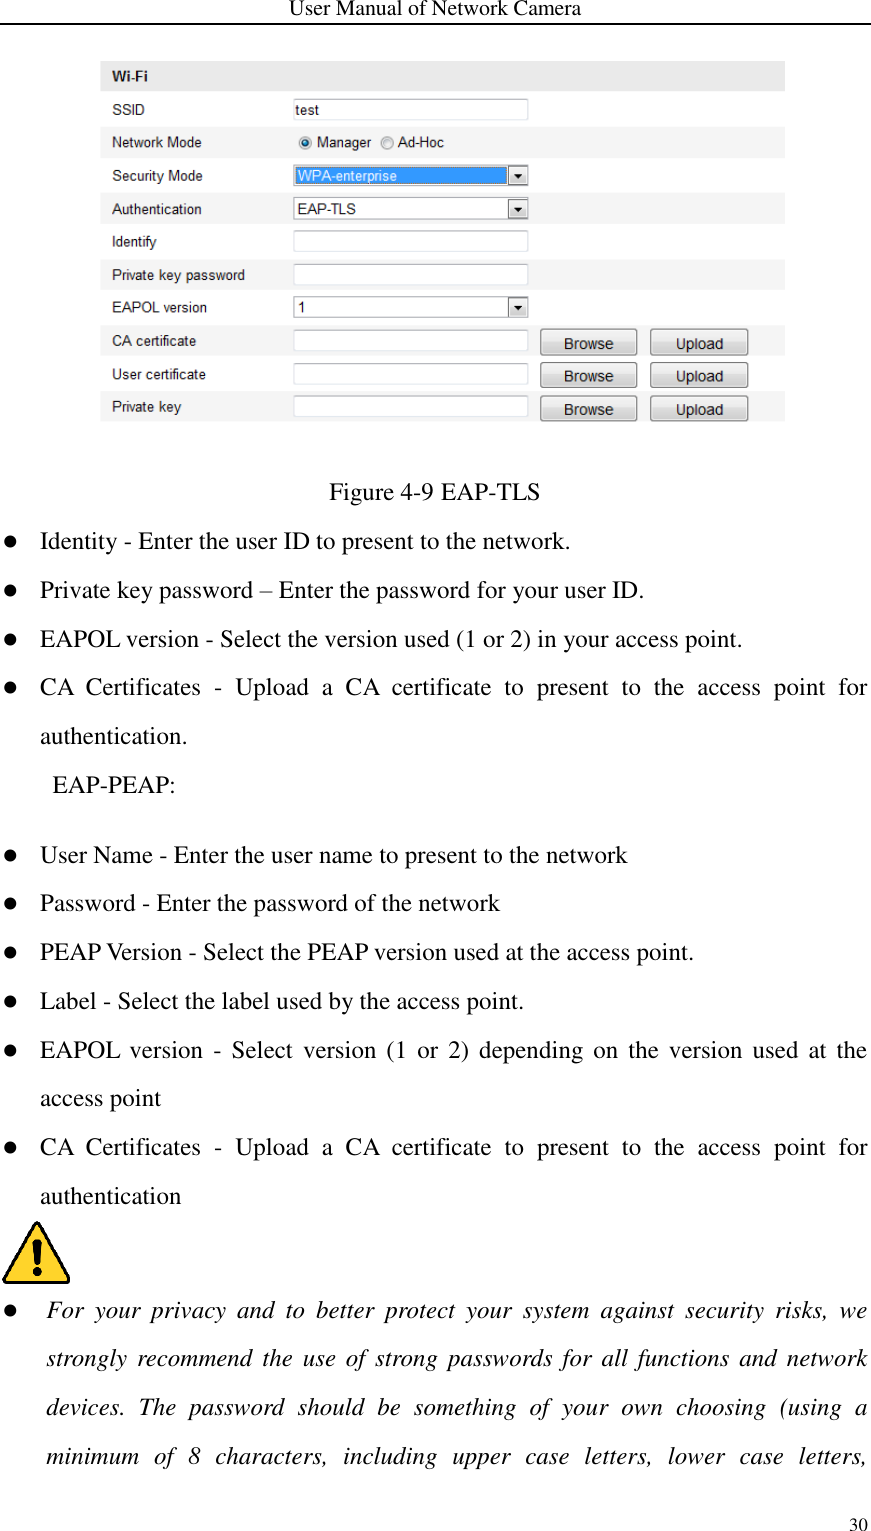 User Manual of Network Camera 30   Figure 4-9 EAP-TLS  Identity - Enter the user ID to present to the network.  Private key password – Enter the password for your user ID.  EAPOL version - Select the version used (1 or 2) in your access point.  CA  Certificates  -  Upload  a  CA  certificate  to  present  to  the  access  point  for authentication. EAP-PEAP:  User Name - Enter the user name to present to the network  Password - Enter the password of the network  PEAP Version - Select the PEAP version used at the access point.  Label - Select the label used by the access point.  EAPOL version  -  Select  version  (1 or  2)  depending  on  the  version used  at the access point  CA  Certificates  -  Upload  a  CA  certificate  to  present  to  the  access  point  for authentication   For  your  privacy  and  to  better  protect  your  system  against  security  risks,  we strongly recommend the use of  strong  passwords  for  all functions and  network devices.  The  password  should  be  something  of  your  own  choosing  (using  a minimum  of  8  characters,  including  upper  case  letters,  lower  case  letters, 